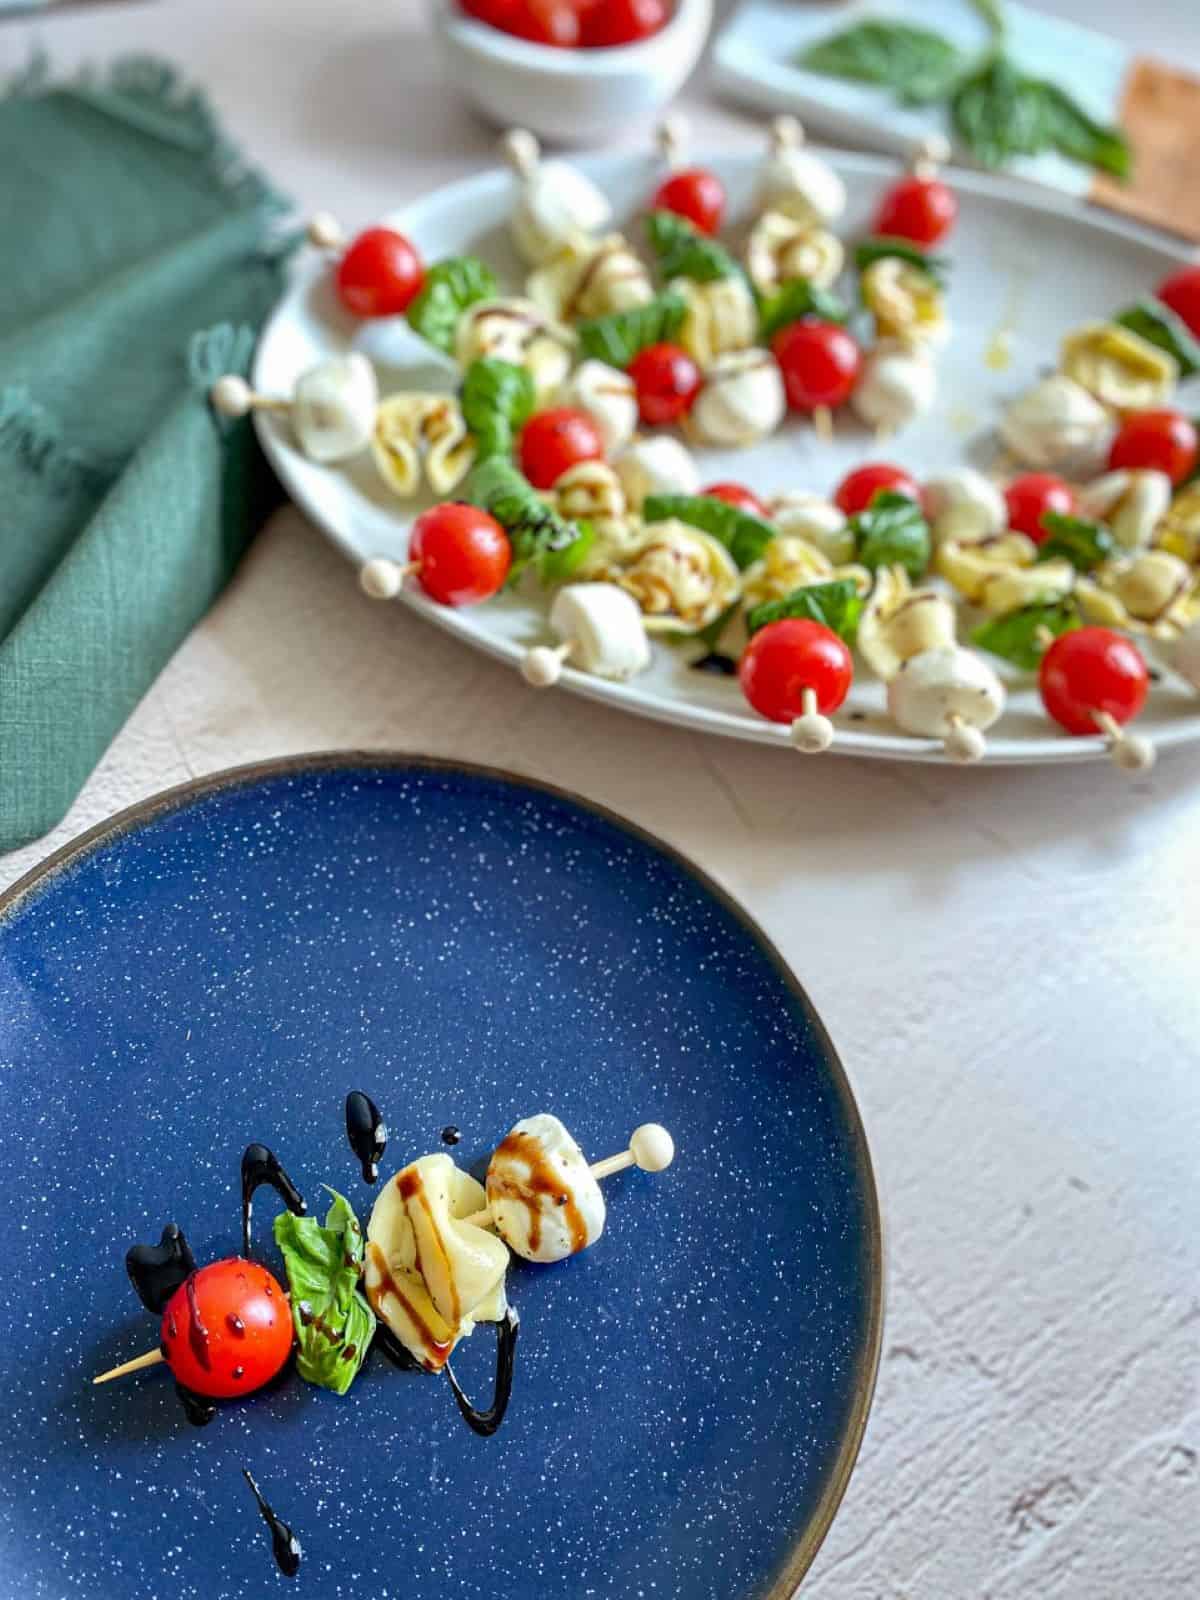 One caprese skewer is on a blue plate. Multiple tortellini skewers with balsamic glaze are on a serving tray in the background. 